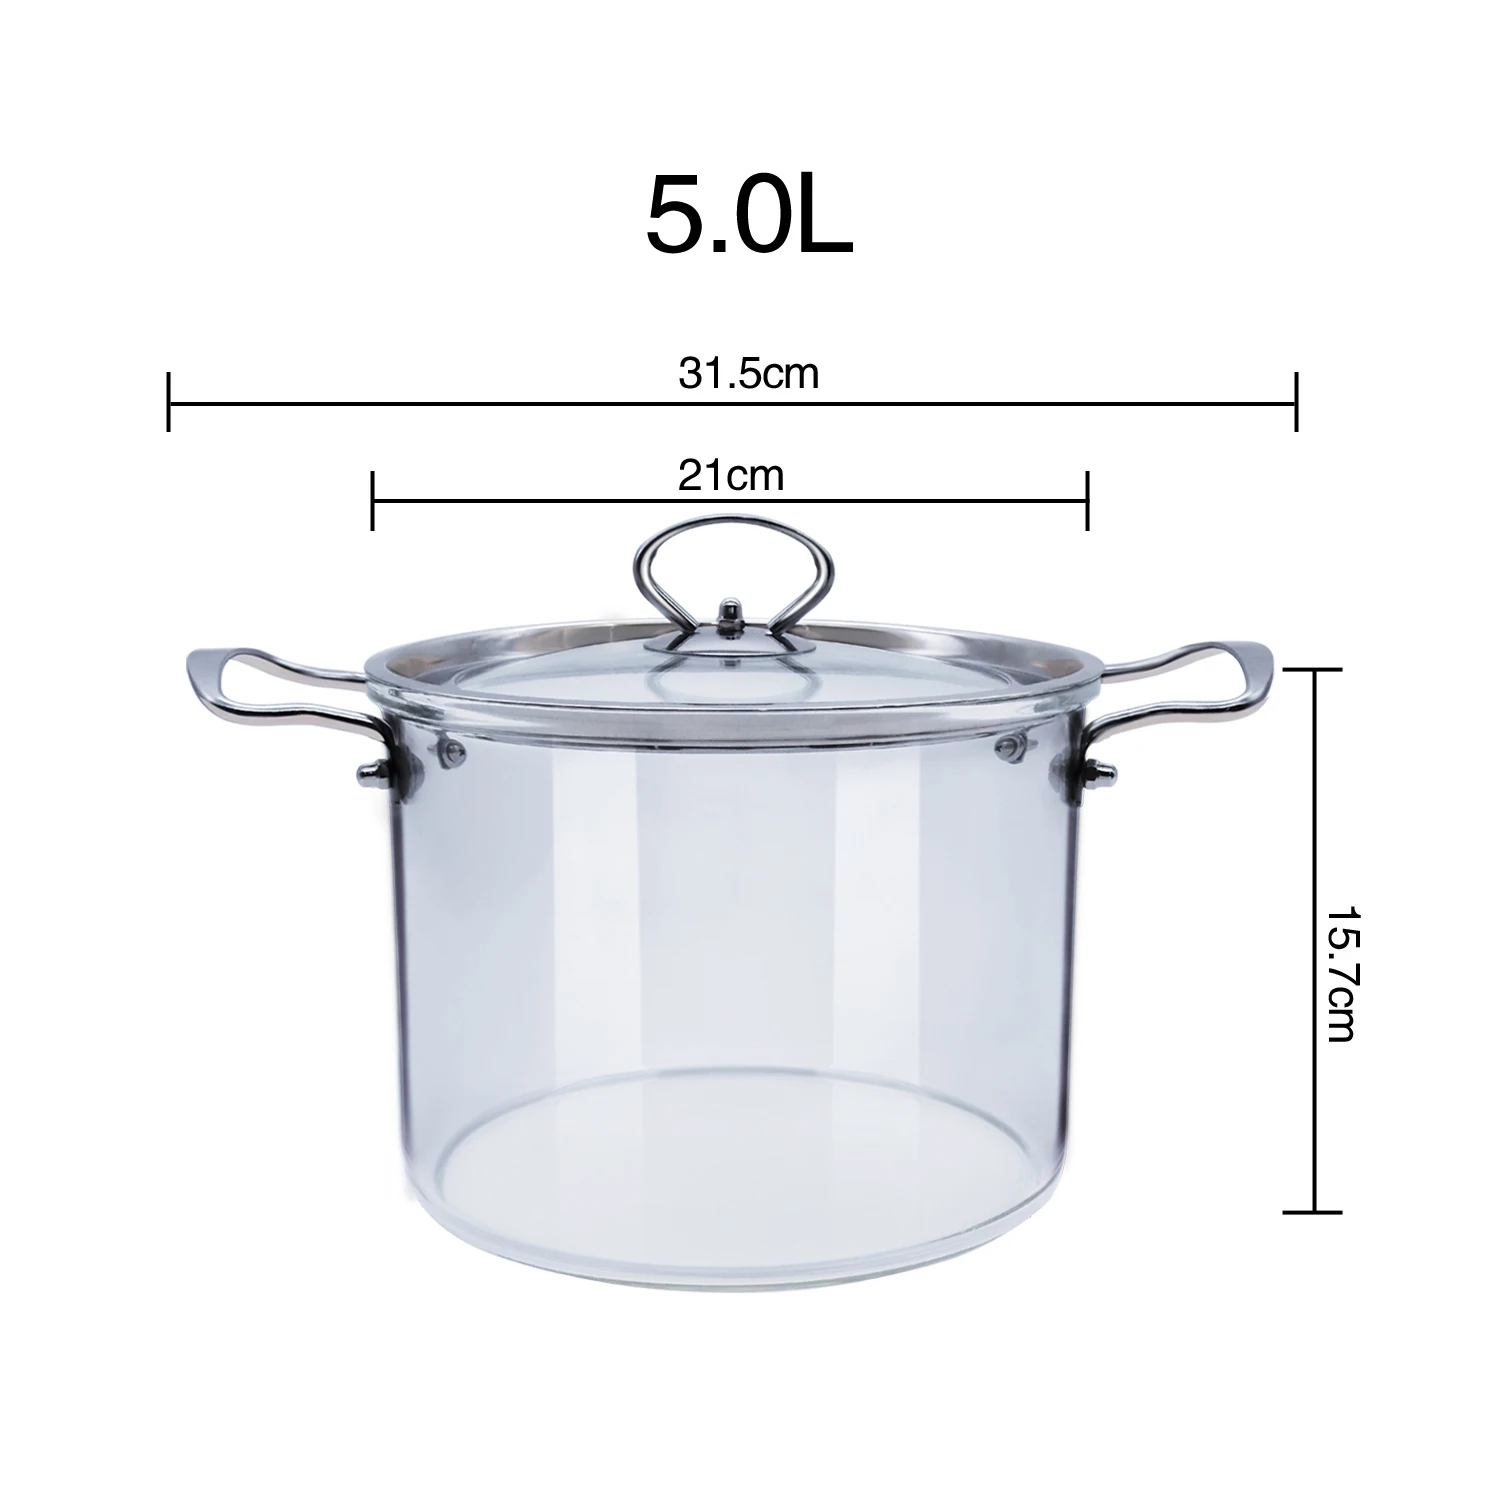 https://ae01.alicdn.com/kf/Hb25c499ca8a6483889a9c09a62be64b4V/2020-New-Glass-Cooking-Pot-With-Cover-Heat-Resistant-Saucepan-Glass-Kitchen-Cookware-Set-Cooktop-With.jpg